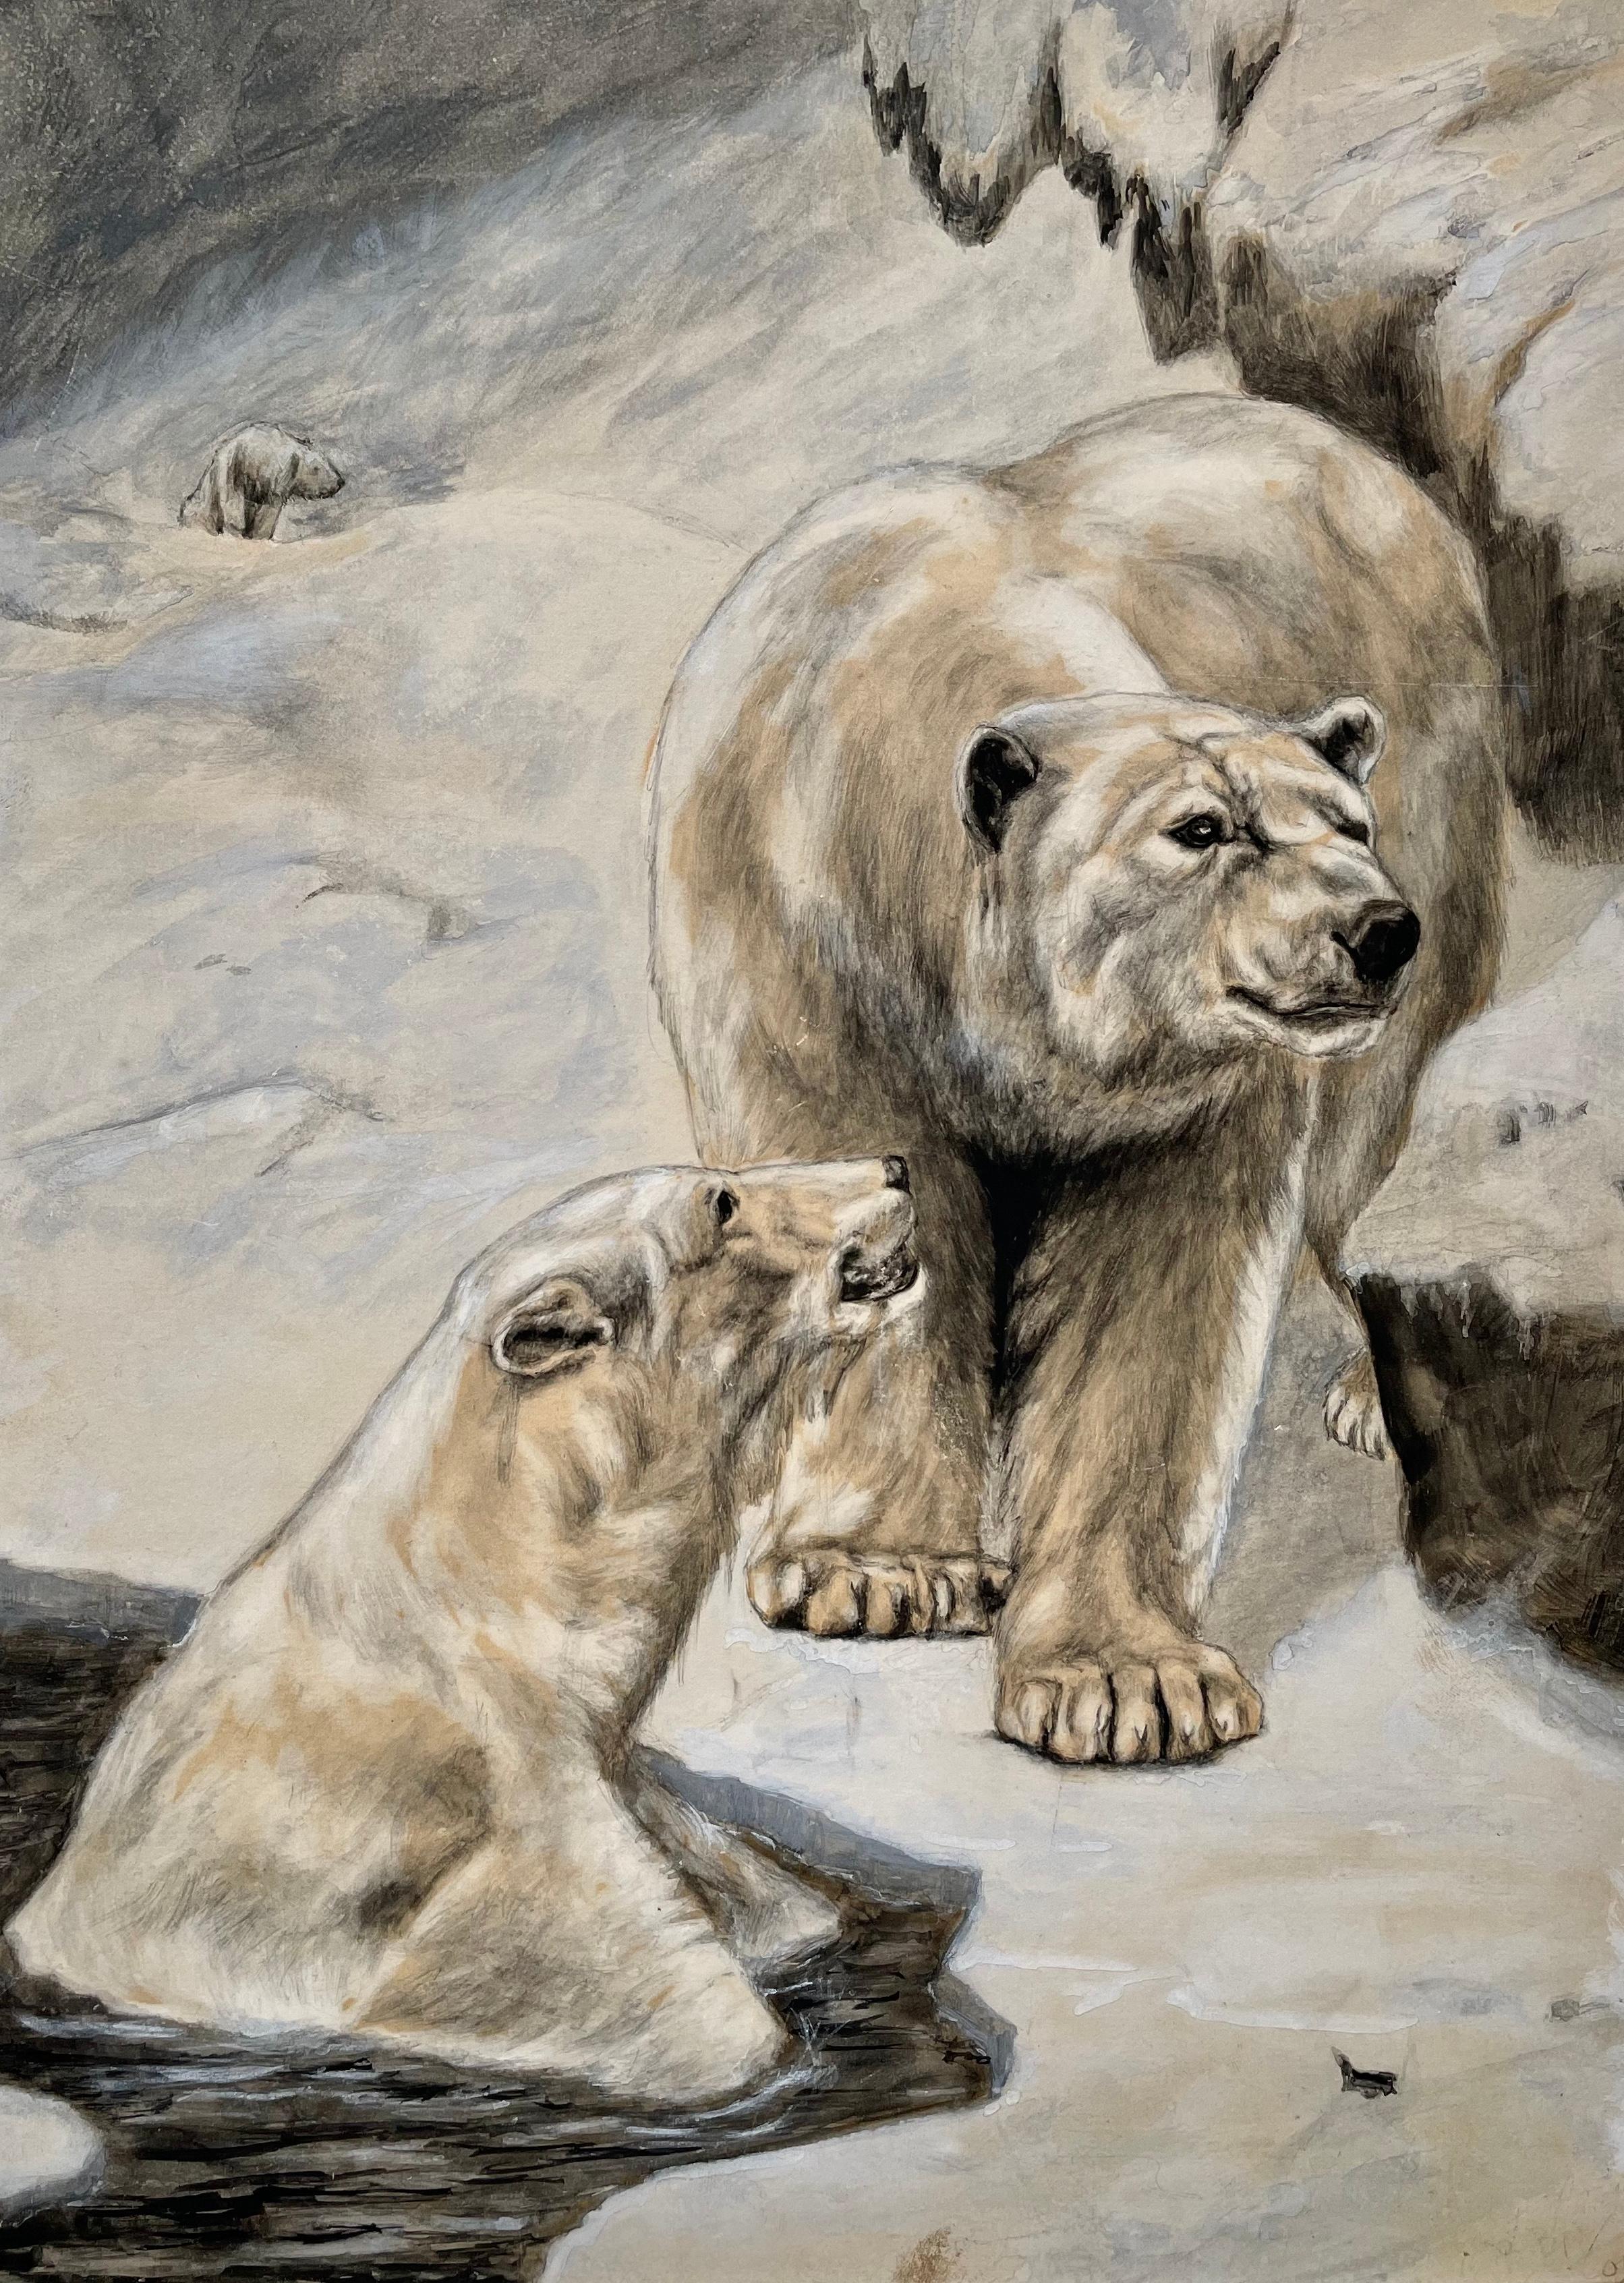 1901 British watercolour illustration of Polar Bears by Alfred Boese